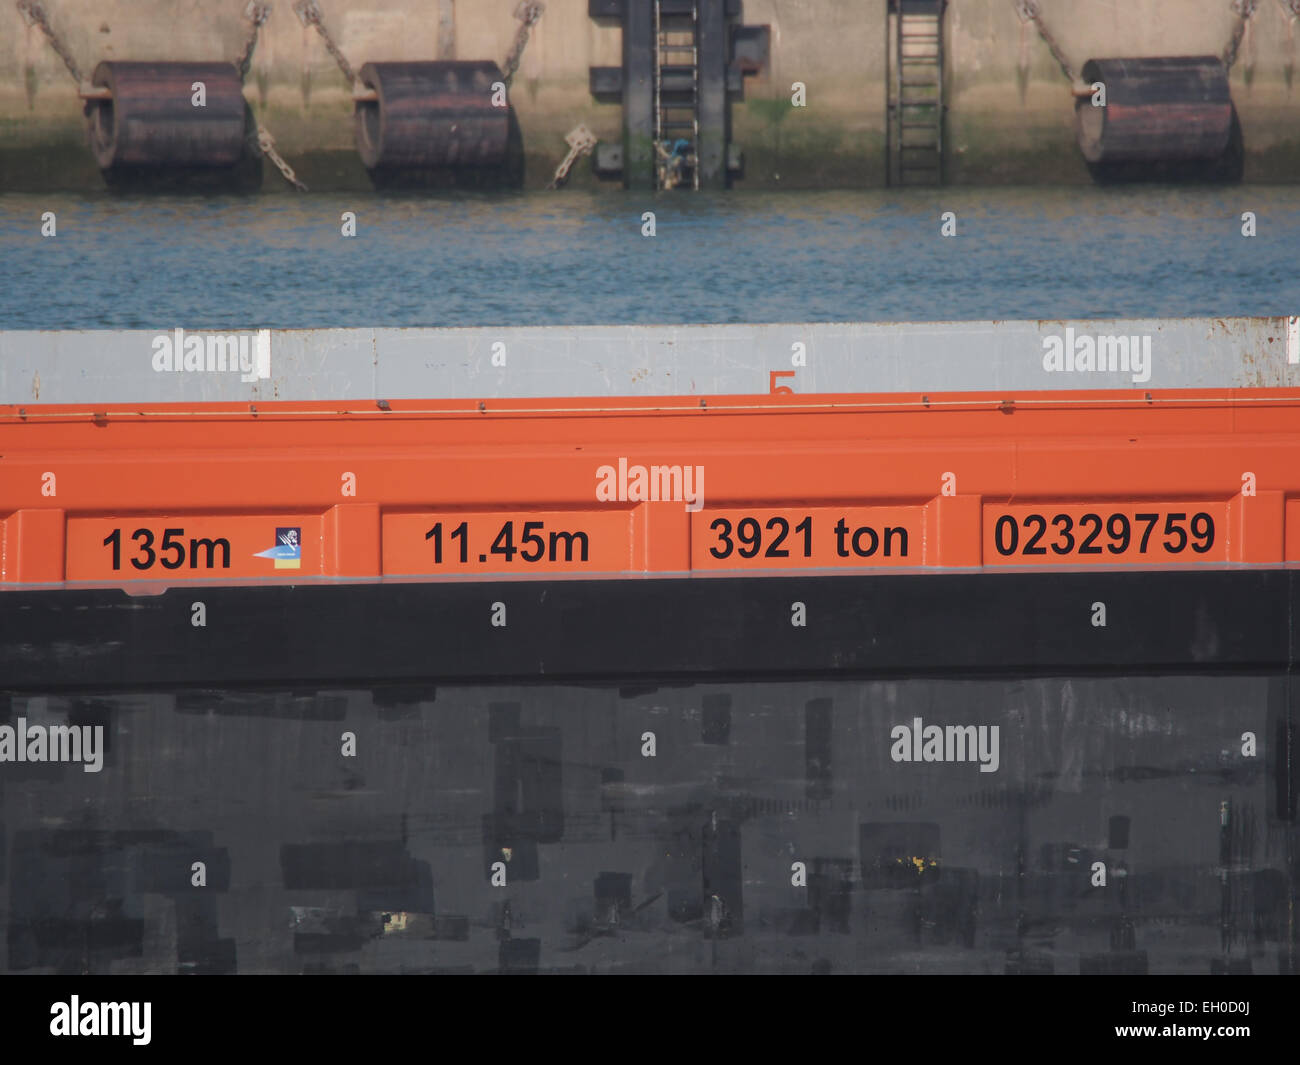 Michel Angelo ENI 02329759, Mississippihaven, Port of Rotterdam, pic2 Stock Photo